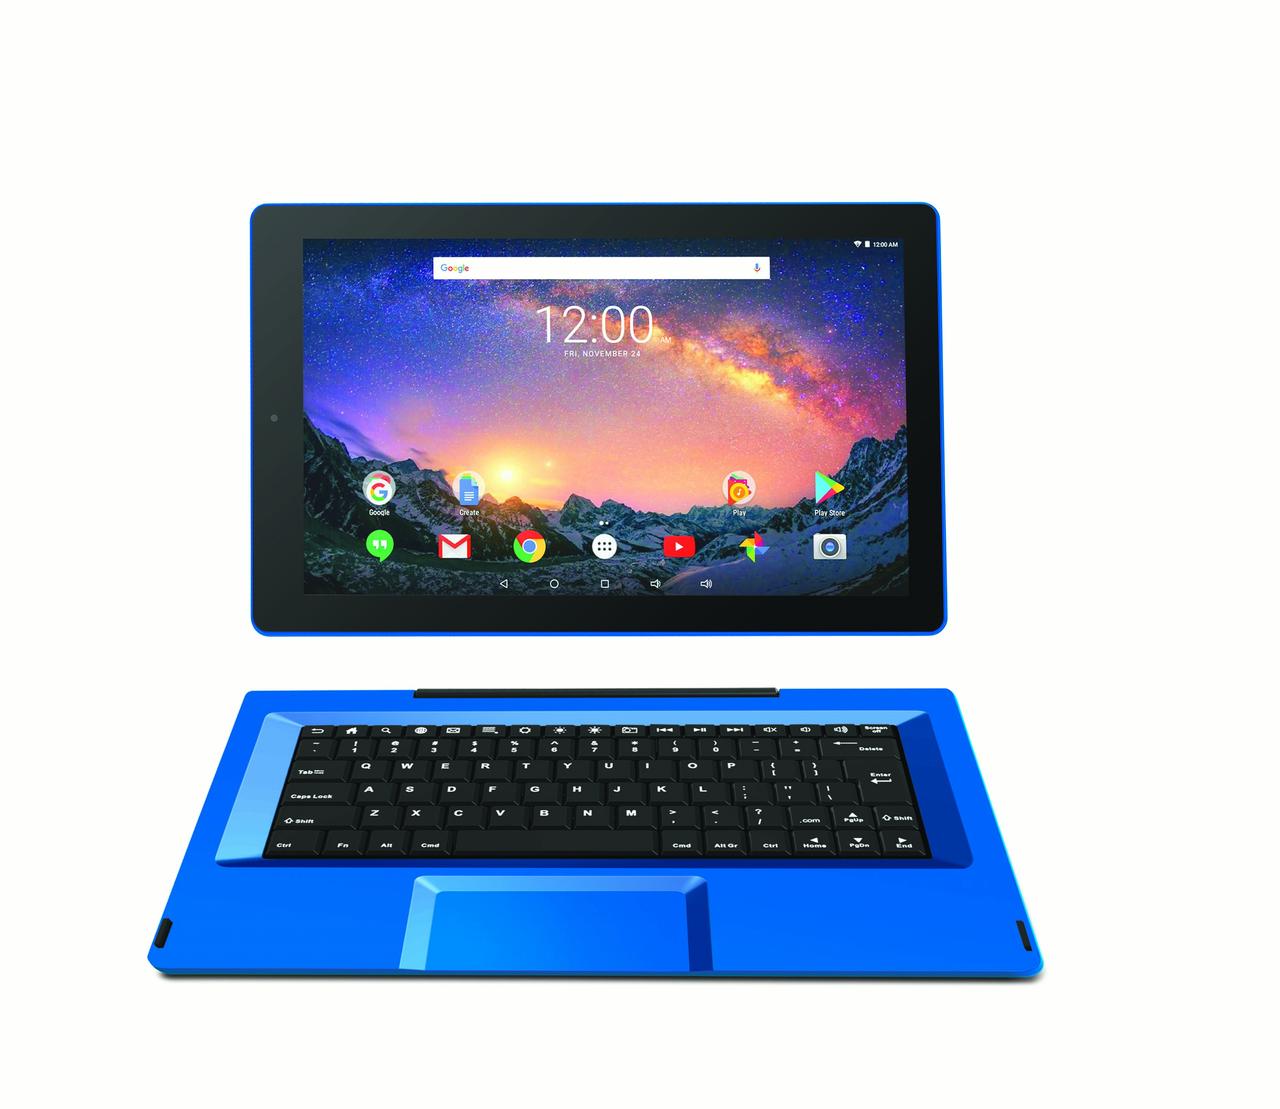 RCA Galileo Pro 11.5" 32GB 2-in-1 Tablet with Keyboard Case Android OS, Blue (Google Classroom Ready) - image 3 of 5